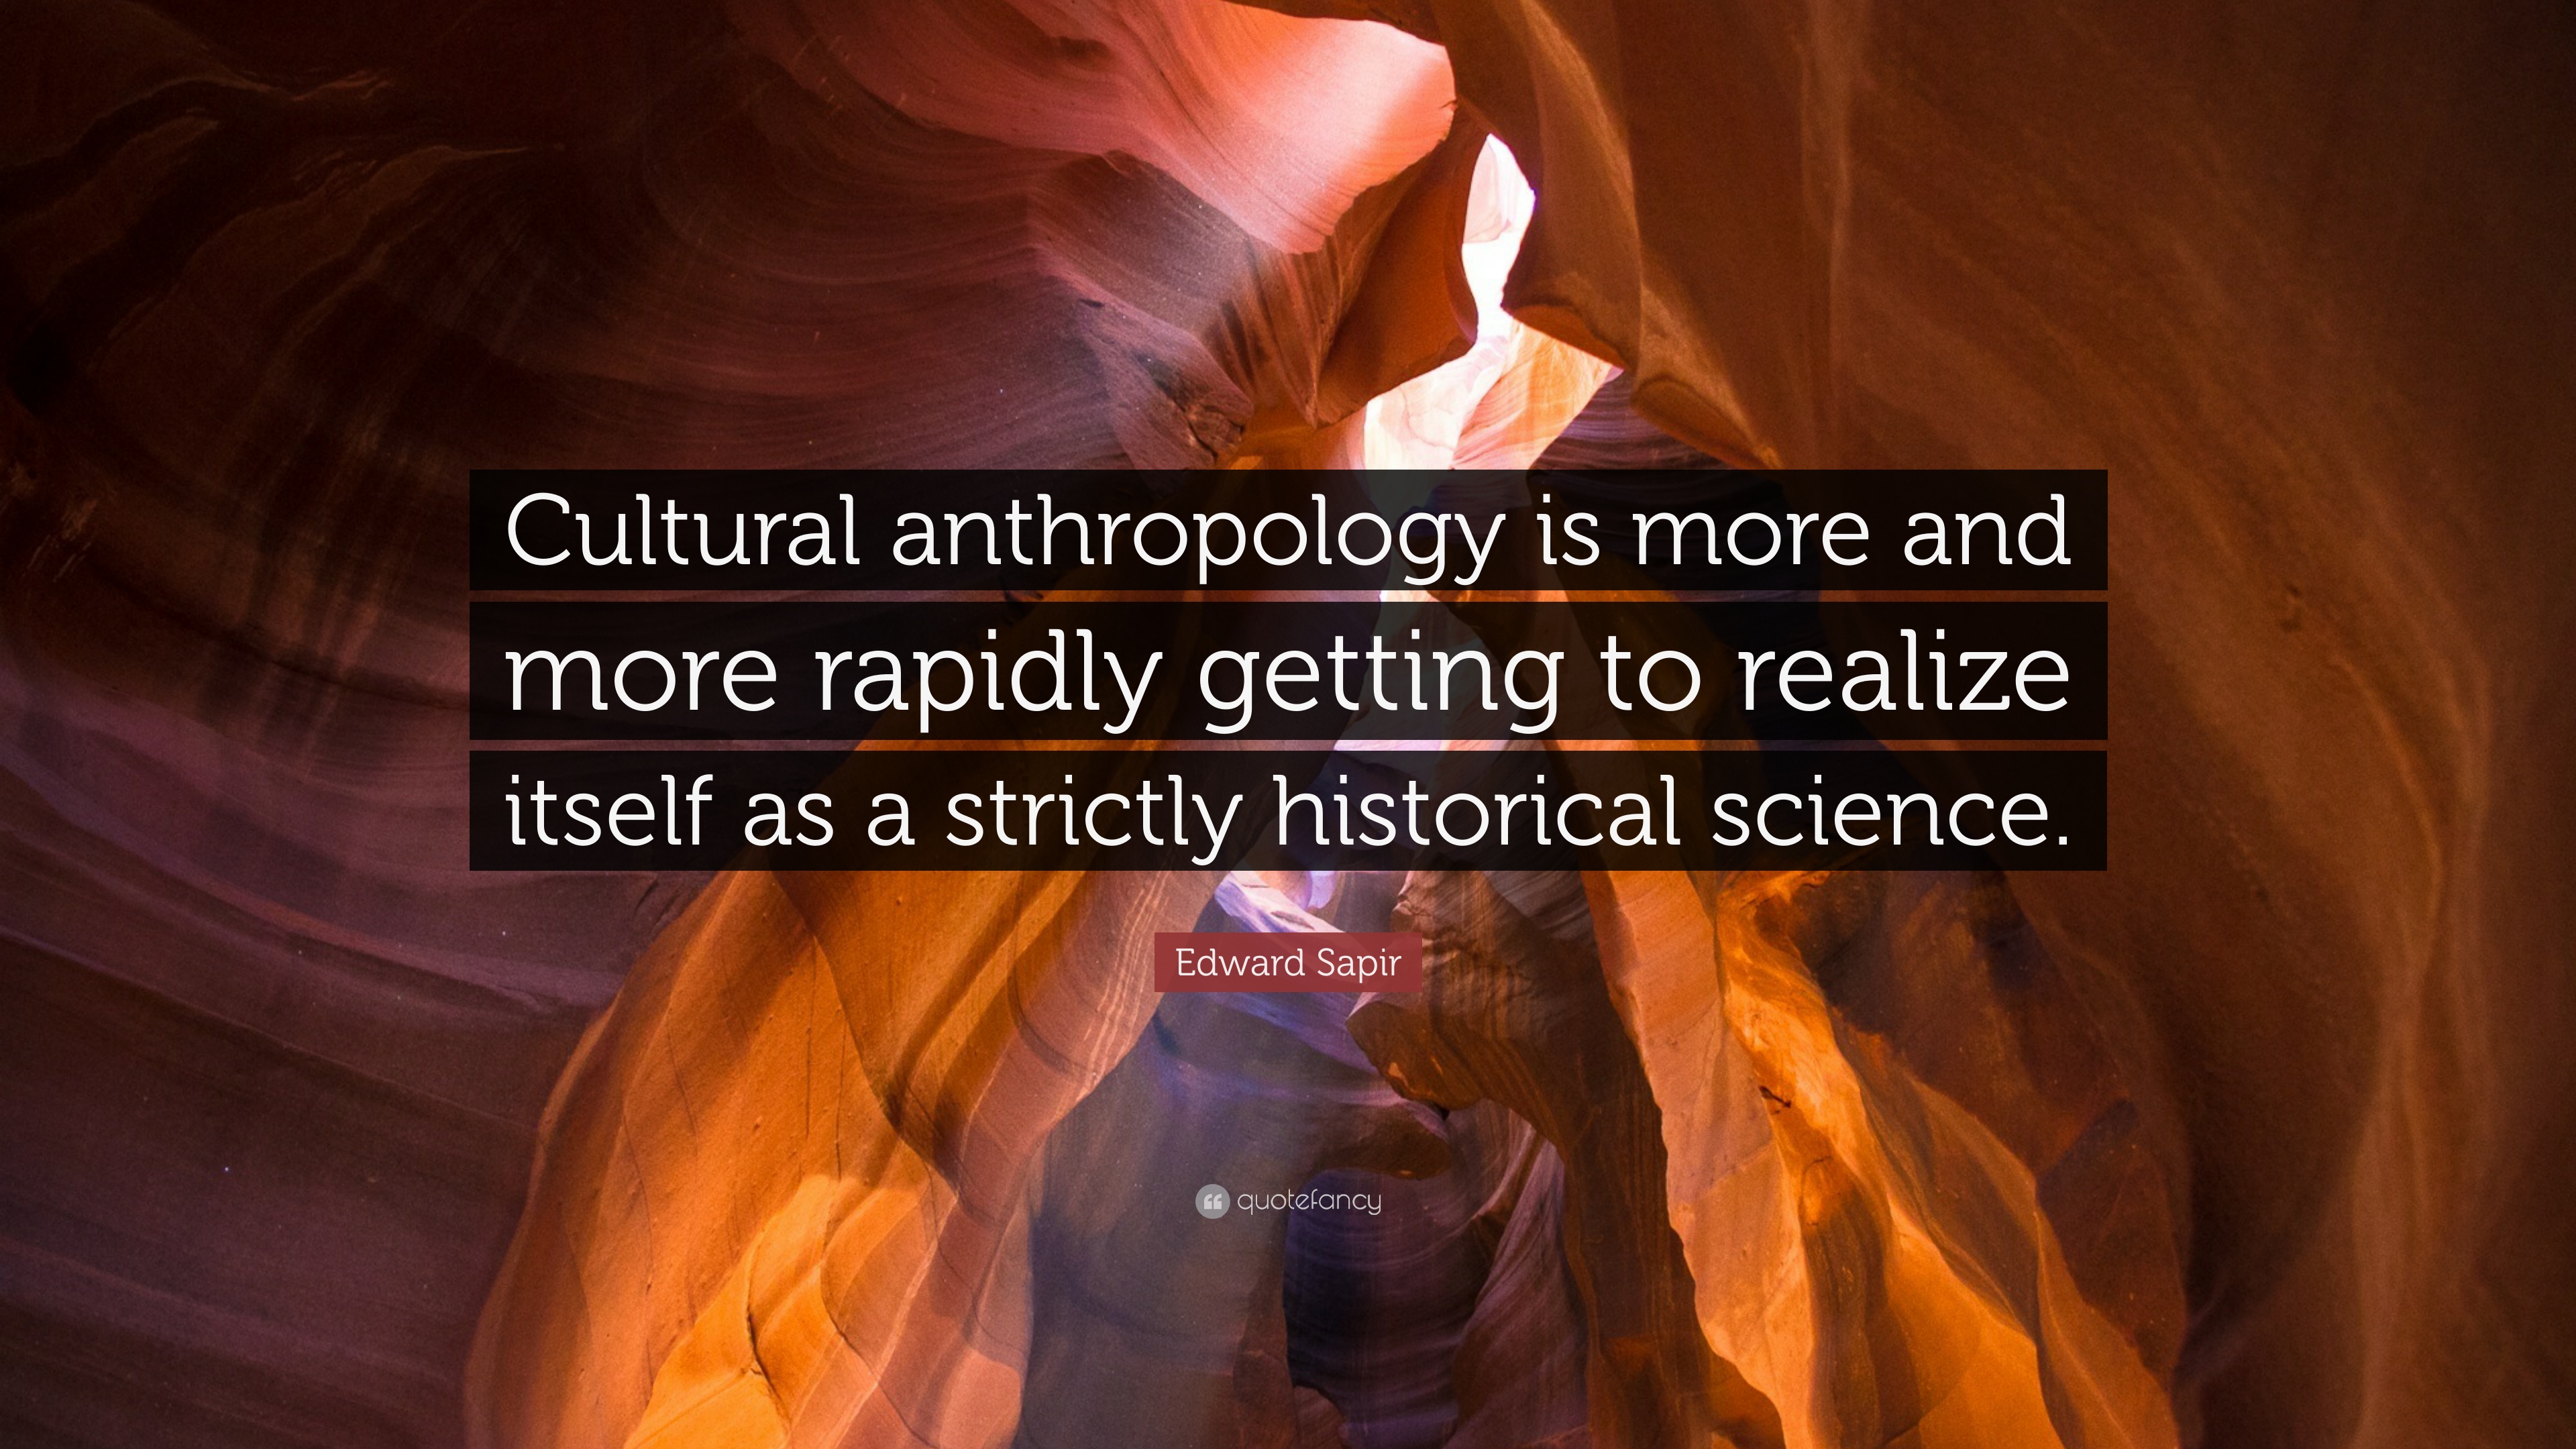 Edward Sapir Quote: “Cultural anthropology is more and more